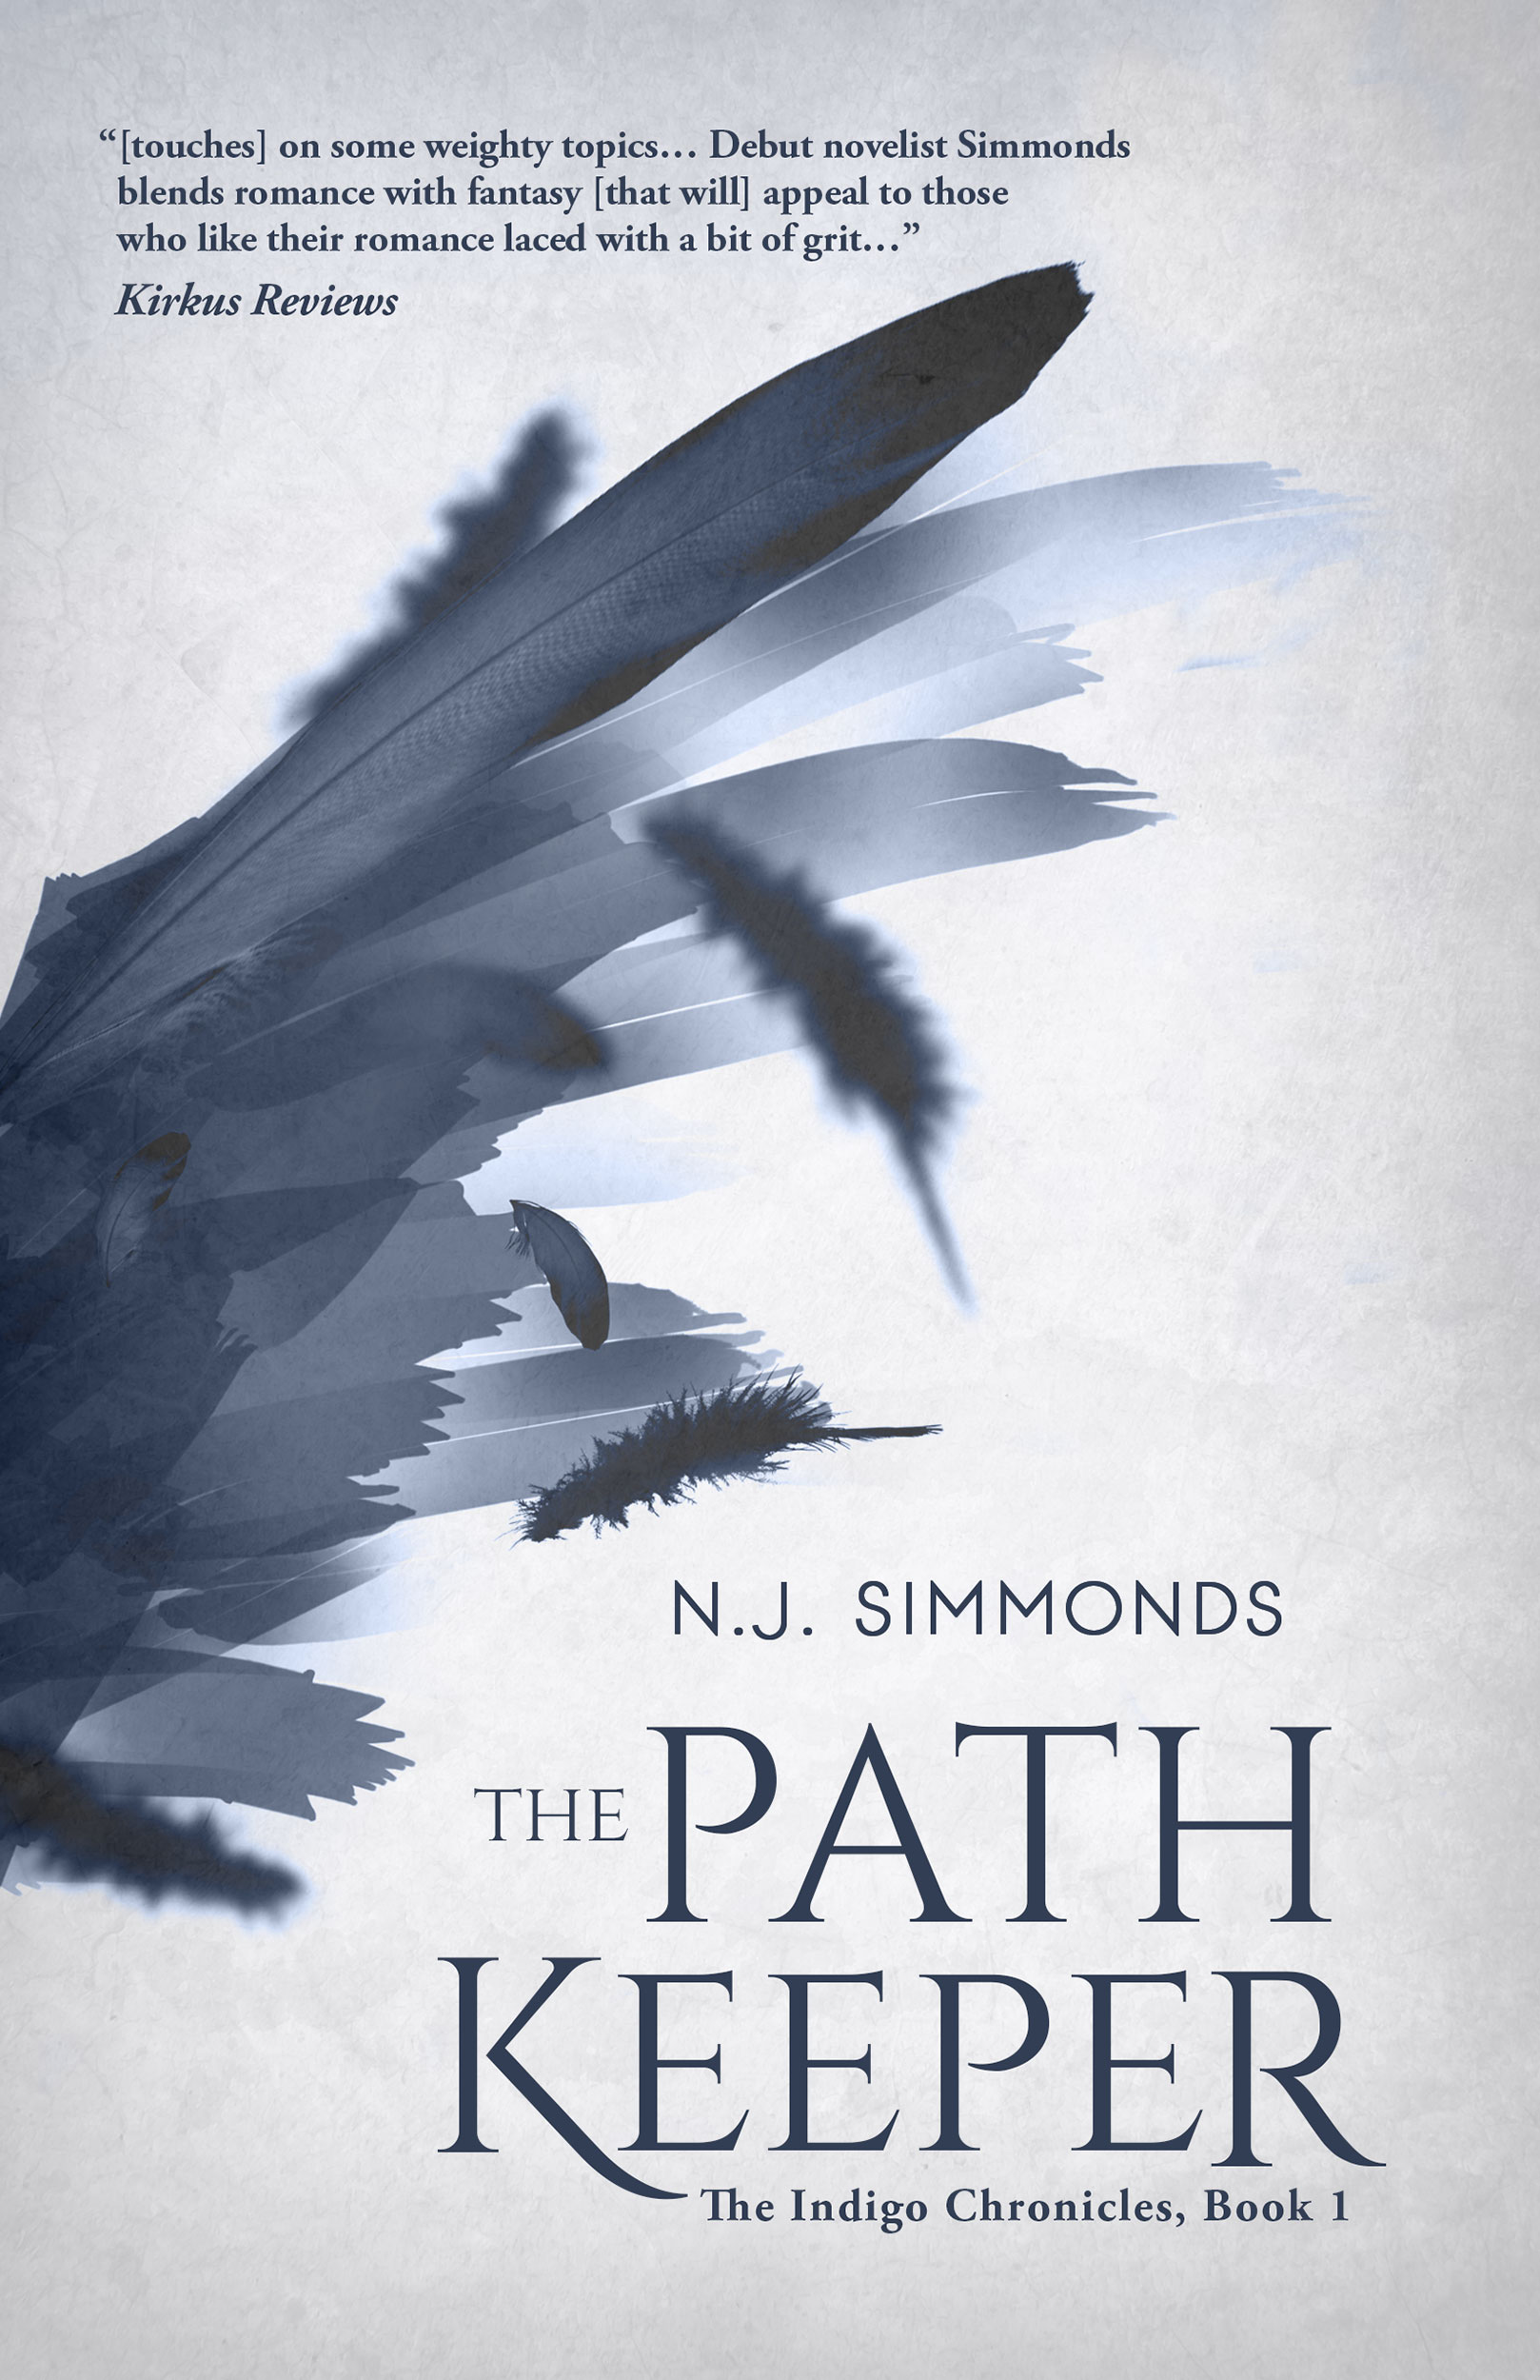 The Path Keeper by N.J. Simmonds